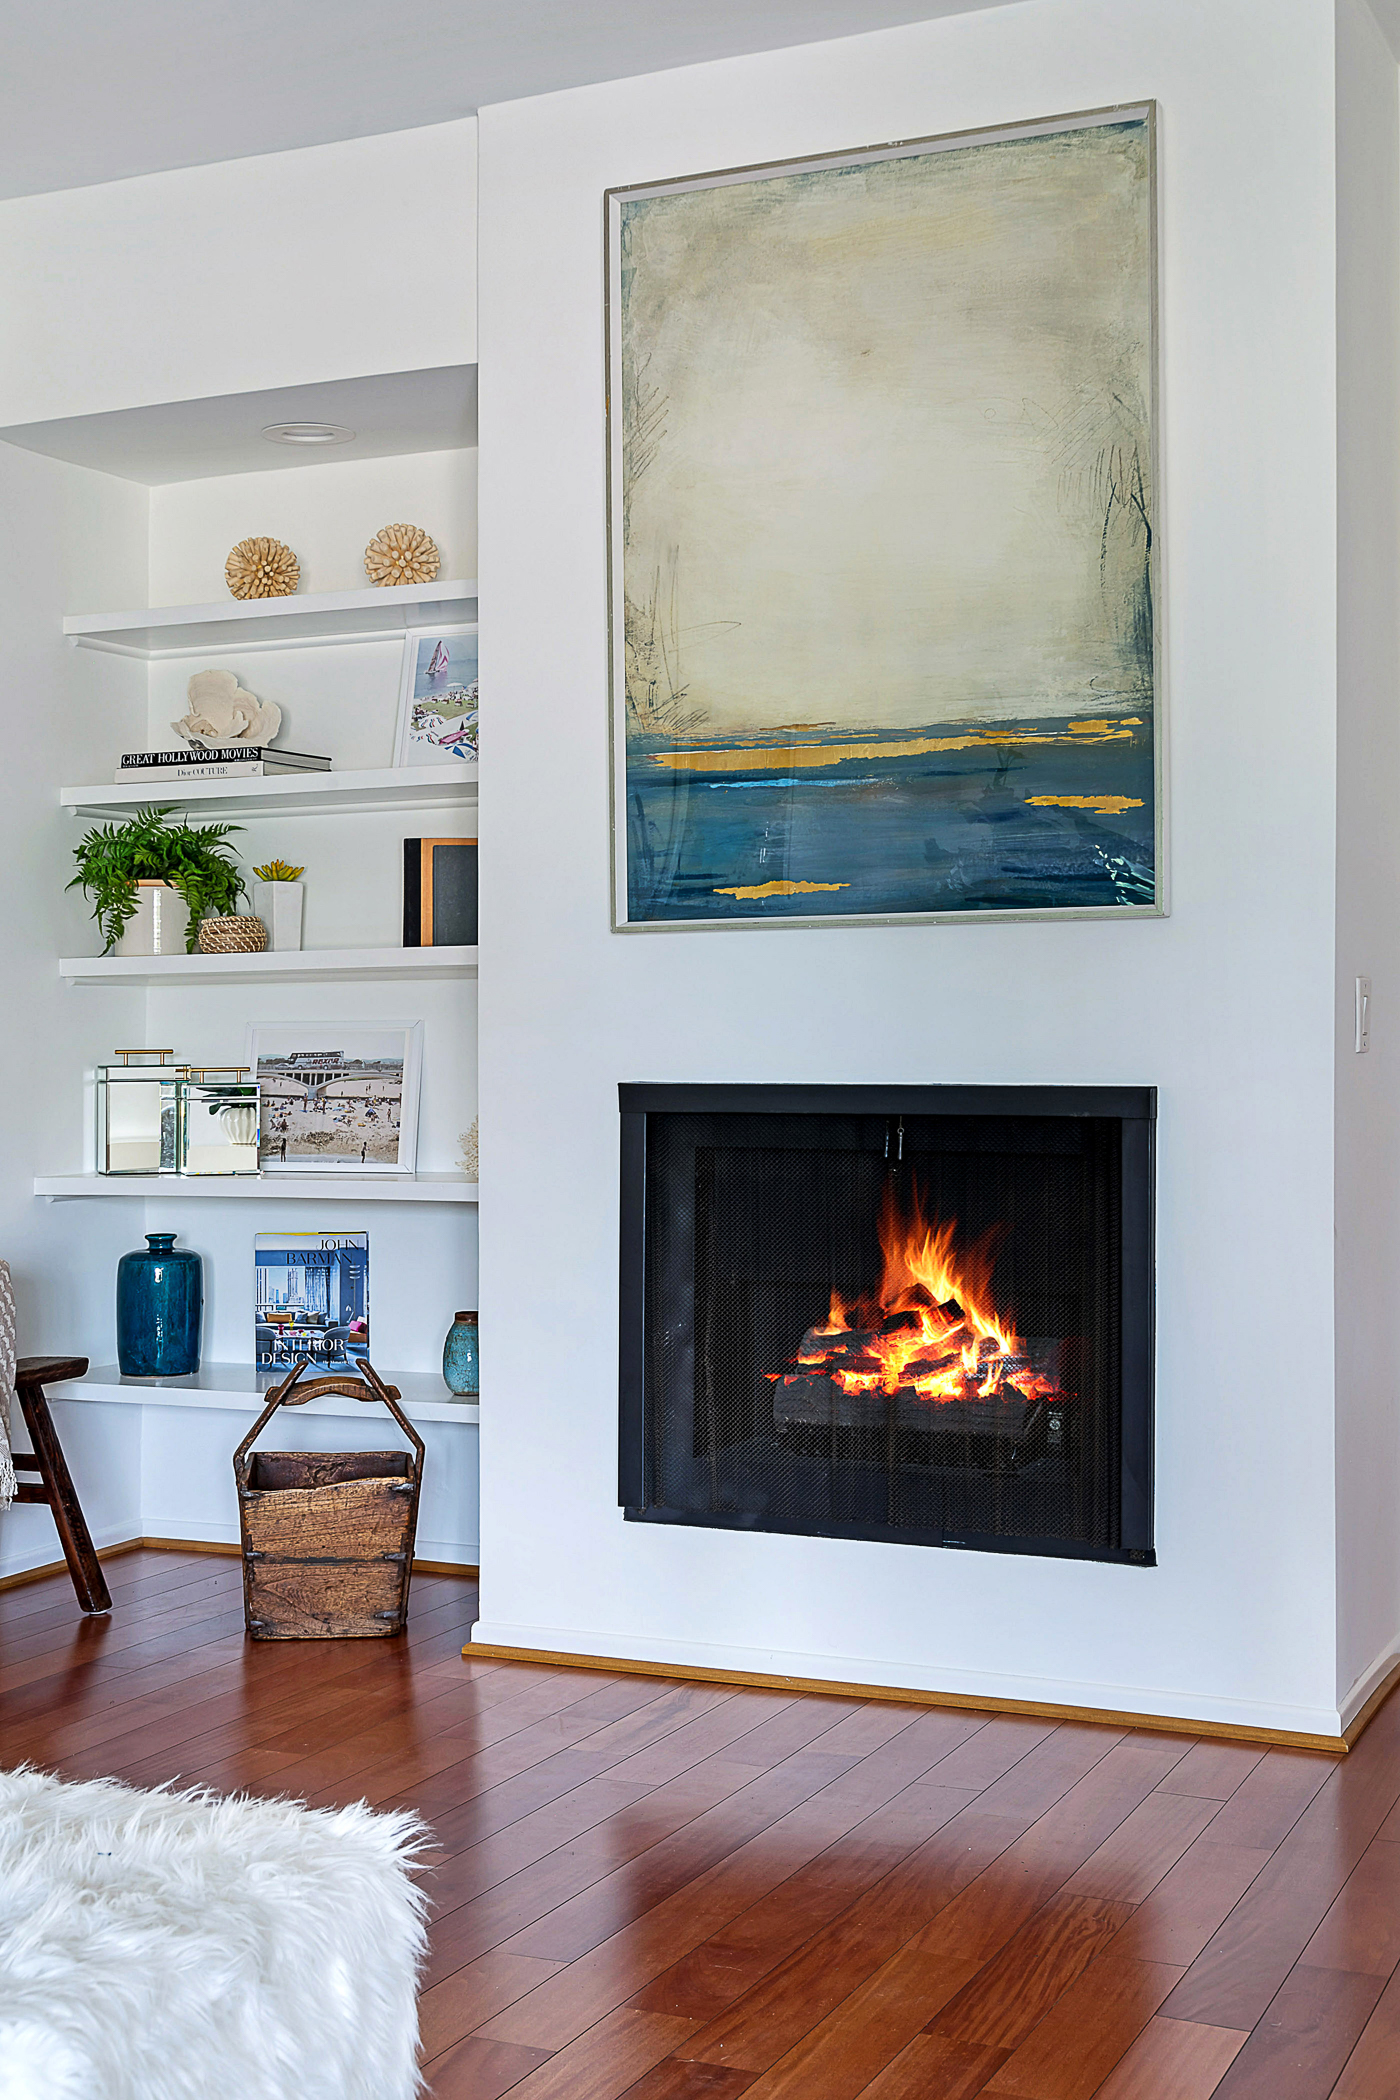 Built-in cabinets and modern in-wall fireplace